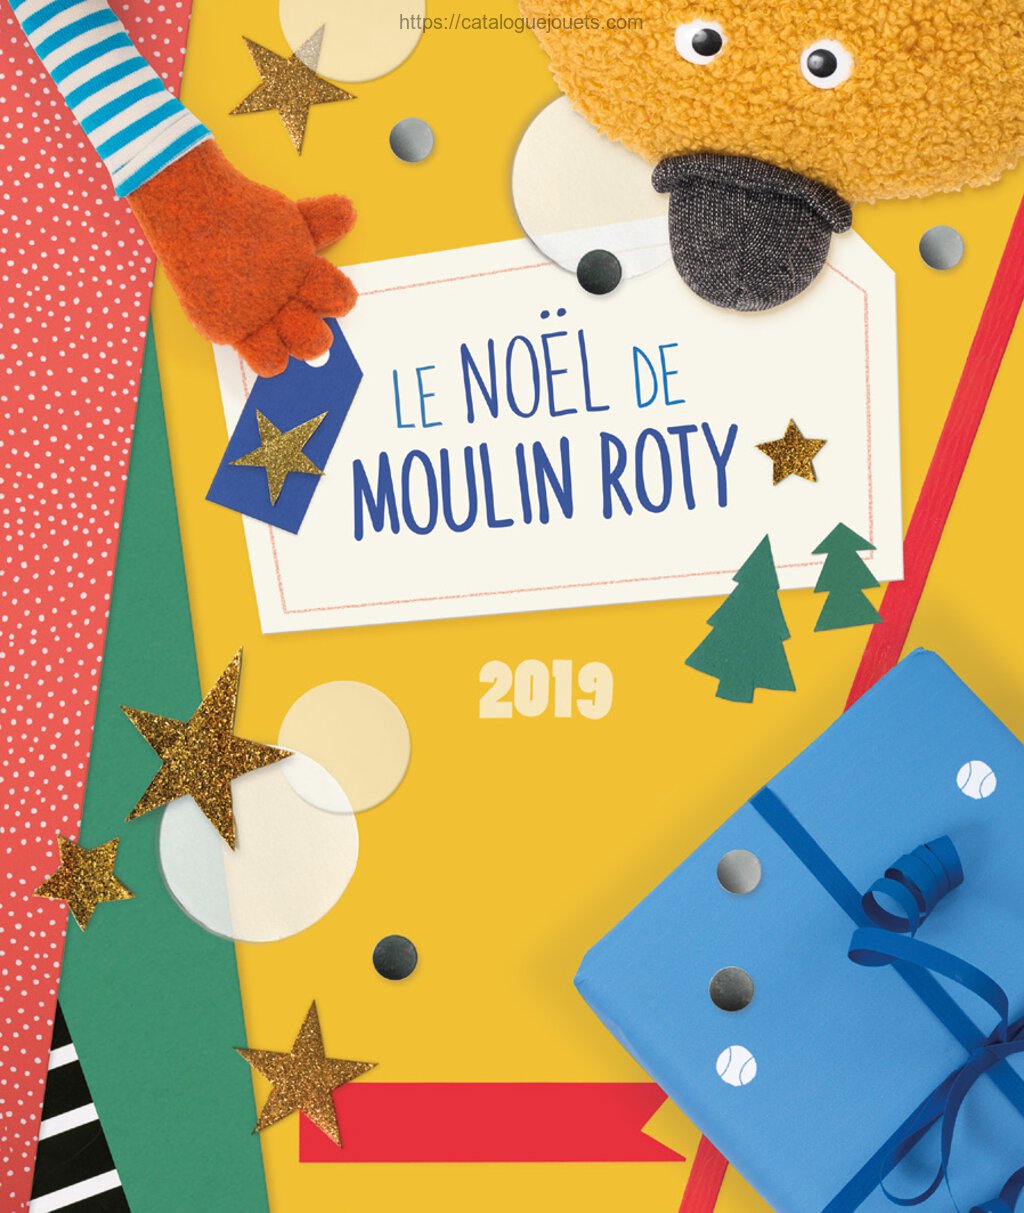 moulin roty 2019